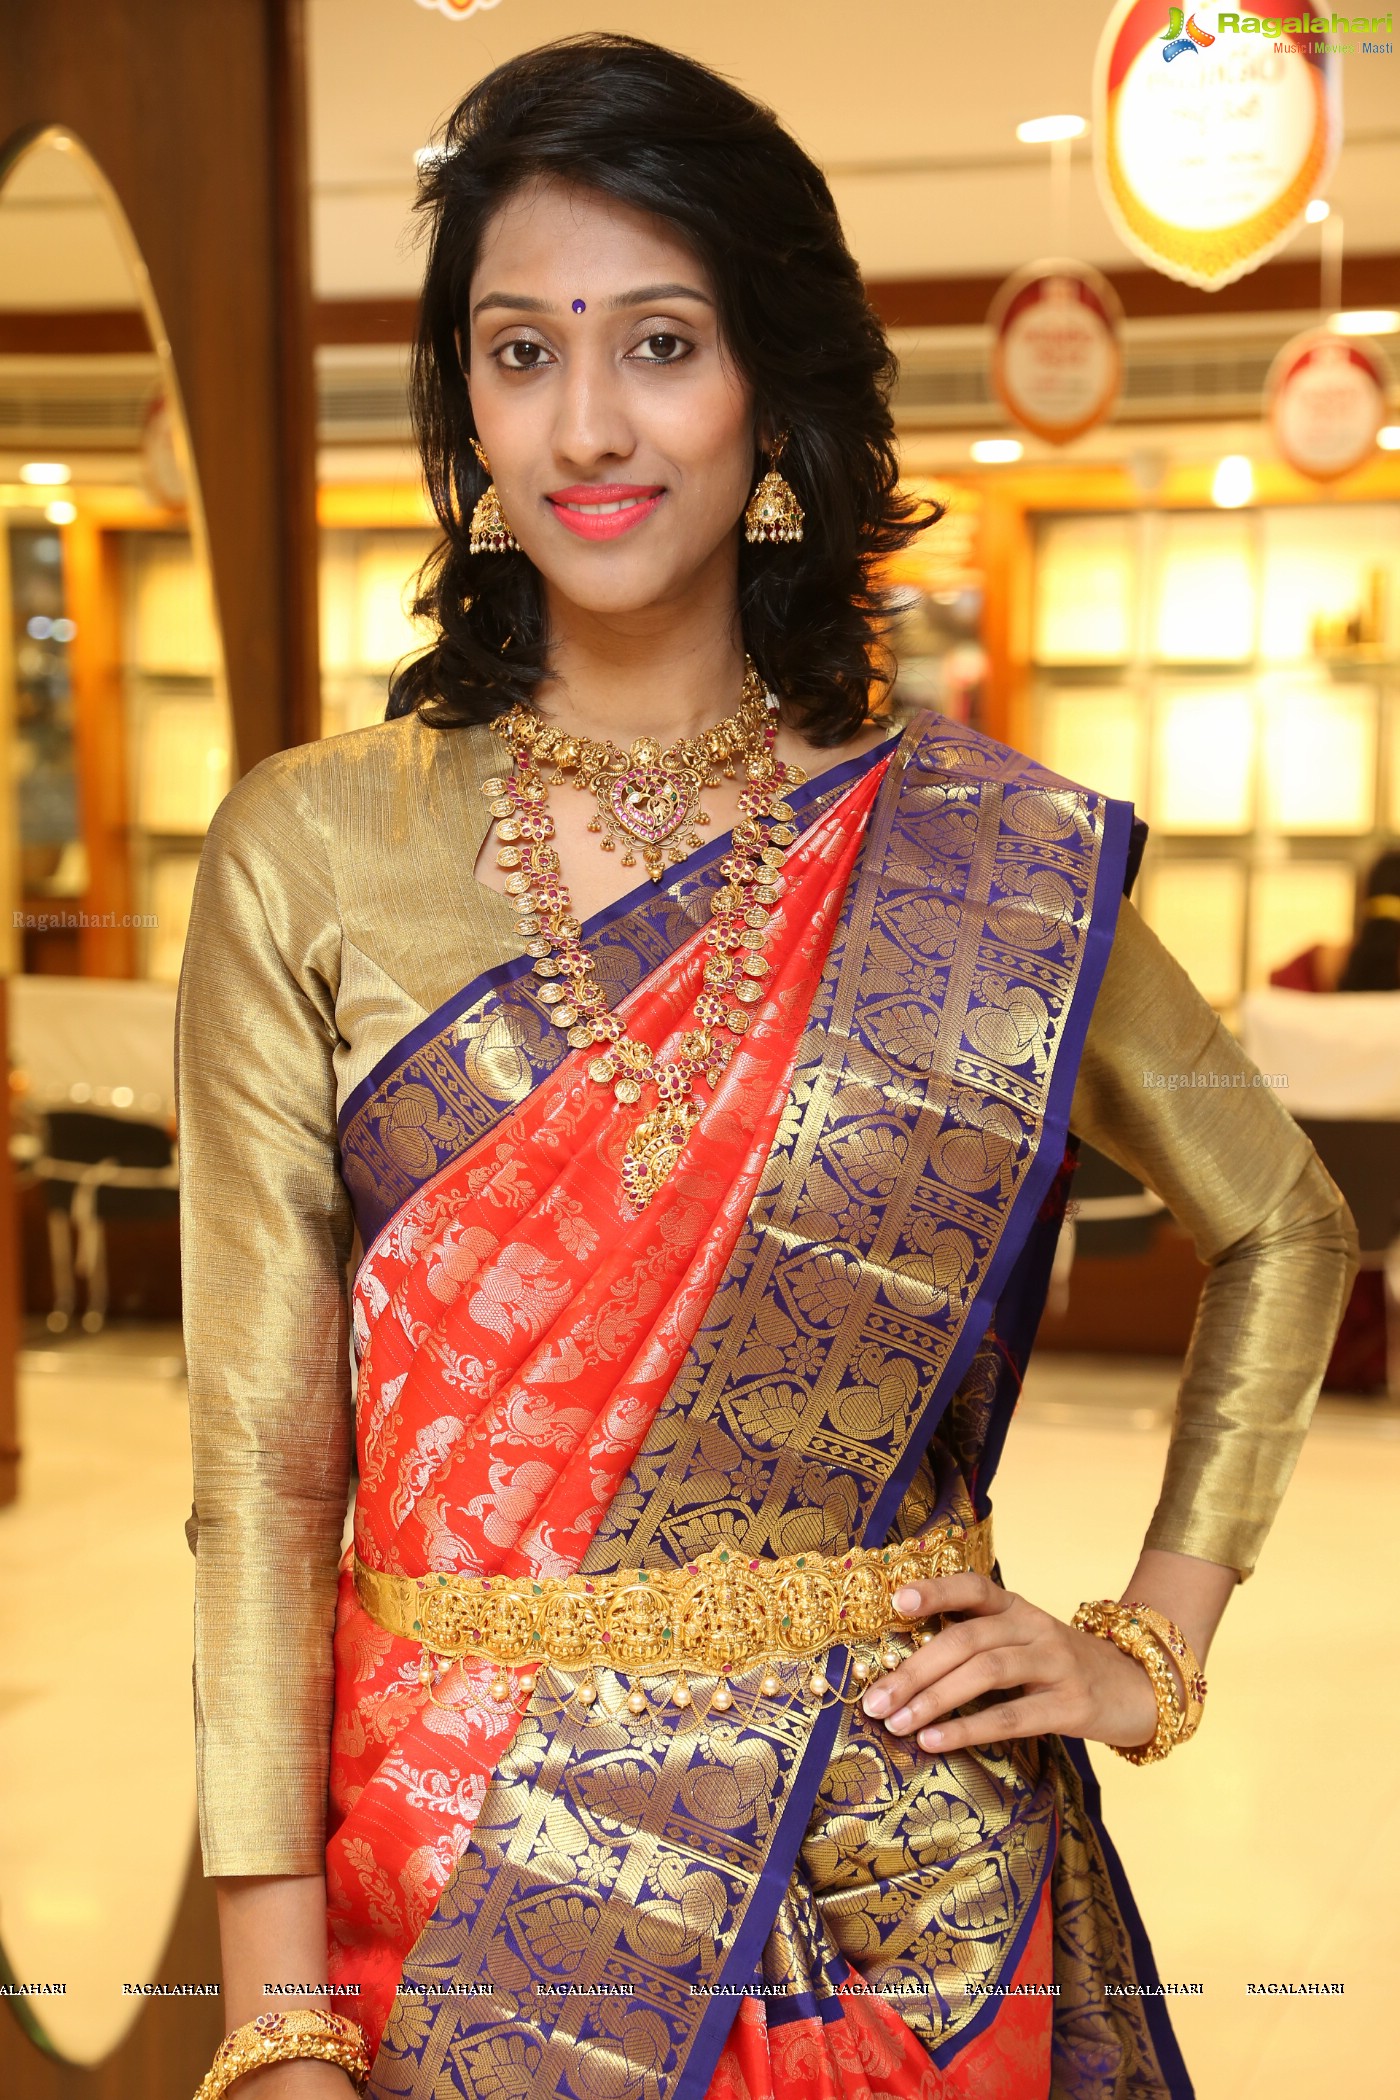 Veena Vemula at Chandana Brothers Independence Special Bridal Collection Fashion Show (High Resolution Photos)